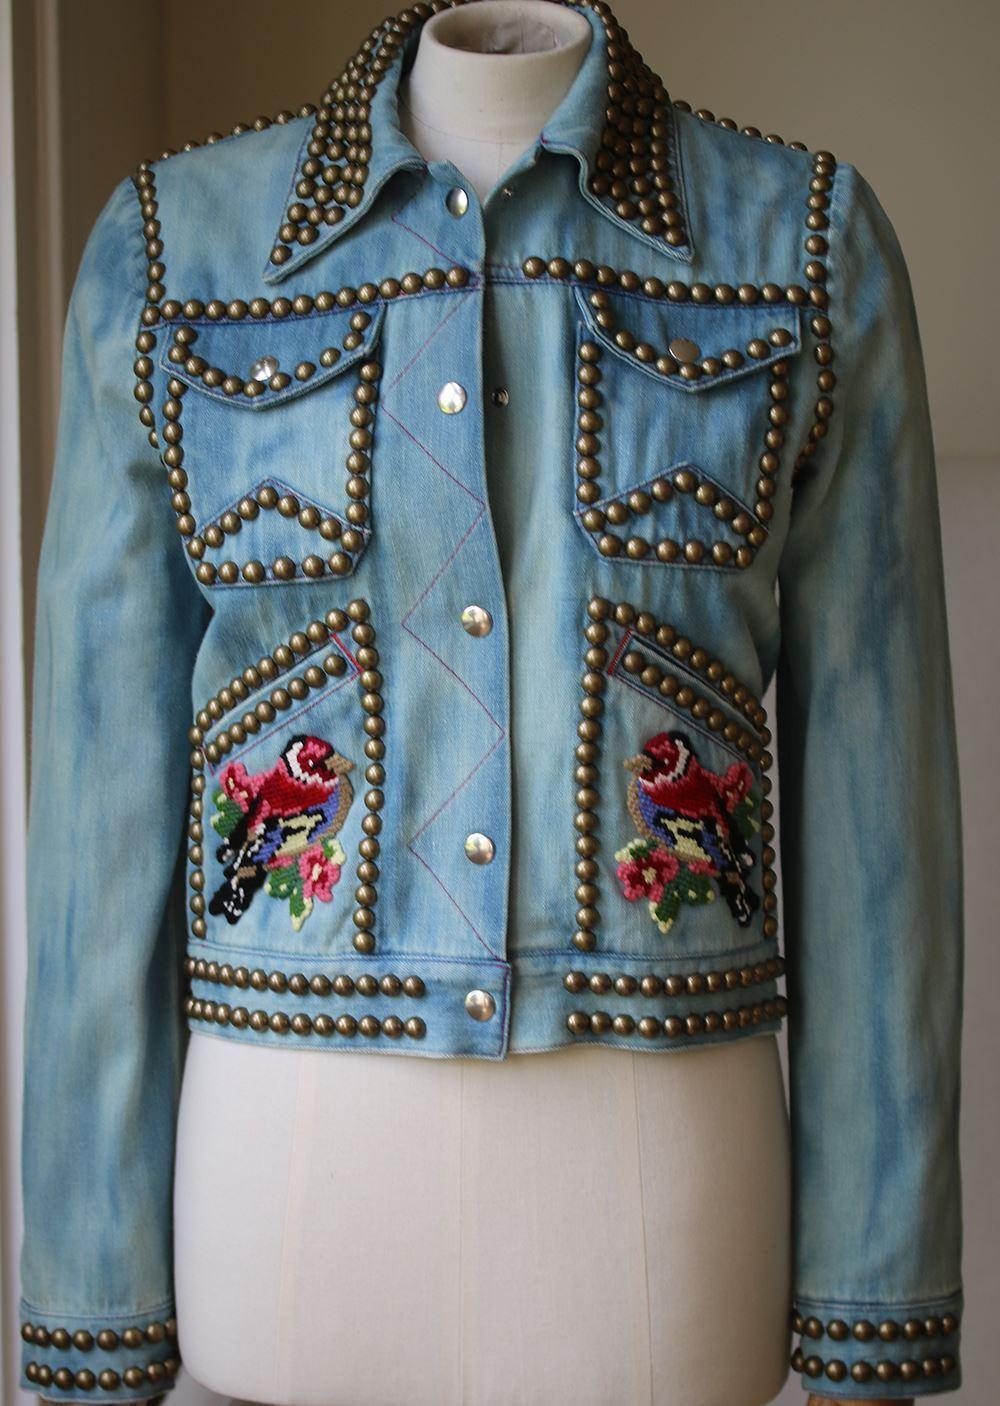 Color Light Blue With Multicolor Details. Pointed Collar. Snap-Buttons Closure Along Front. Two Flap Pockets At Chest, Two Slanted Pockets On Front. Embroidered Patches On Front. Lined. 100% Cotton.

Size: IT 38 (UK 6, US 2, FR 34)

Condition: As